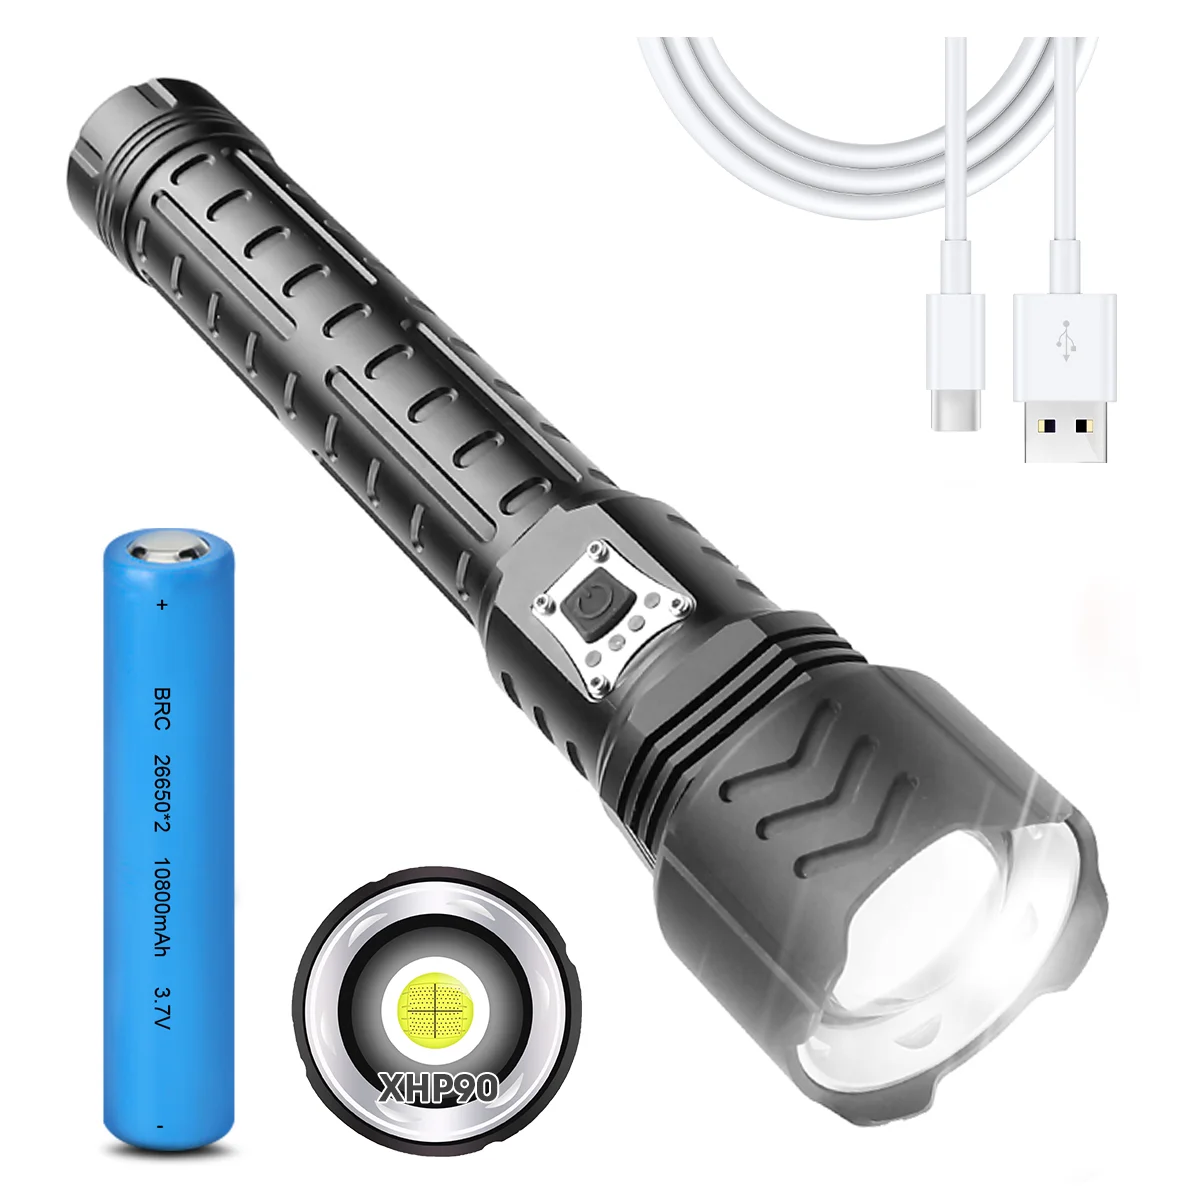 

LED Flashlight Rechargeable Super Bright Handheld Camping Flashlights 26650 Battery USB 5 Mode Searchlight for Home Hiking Torch